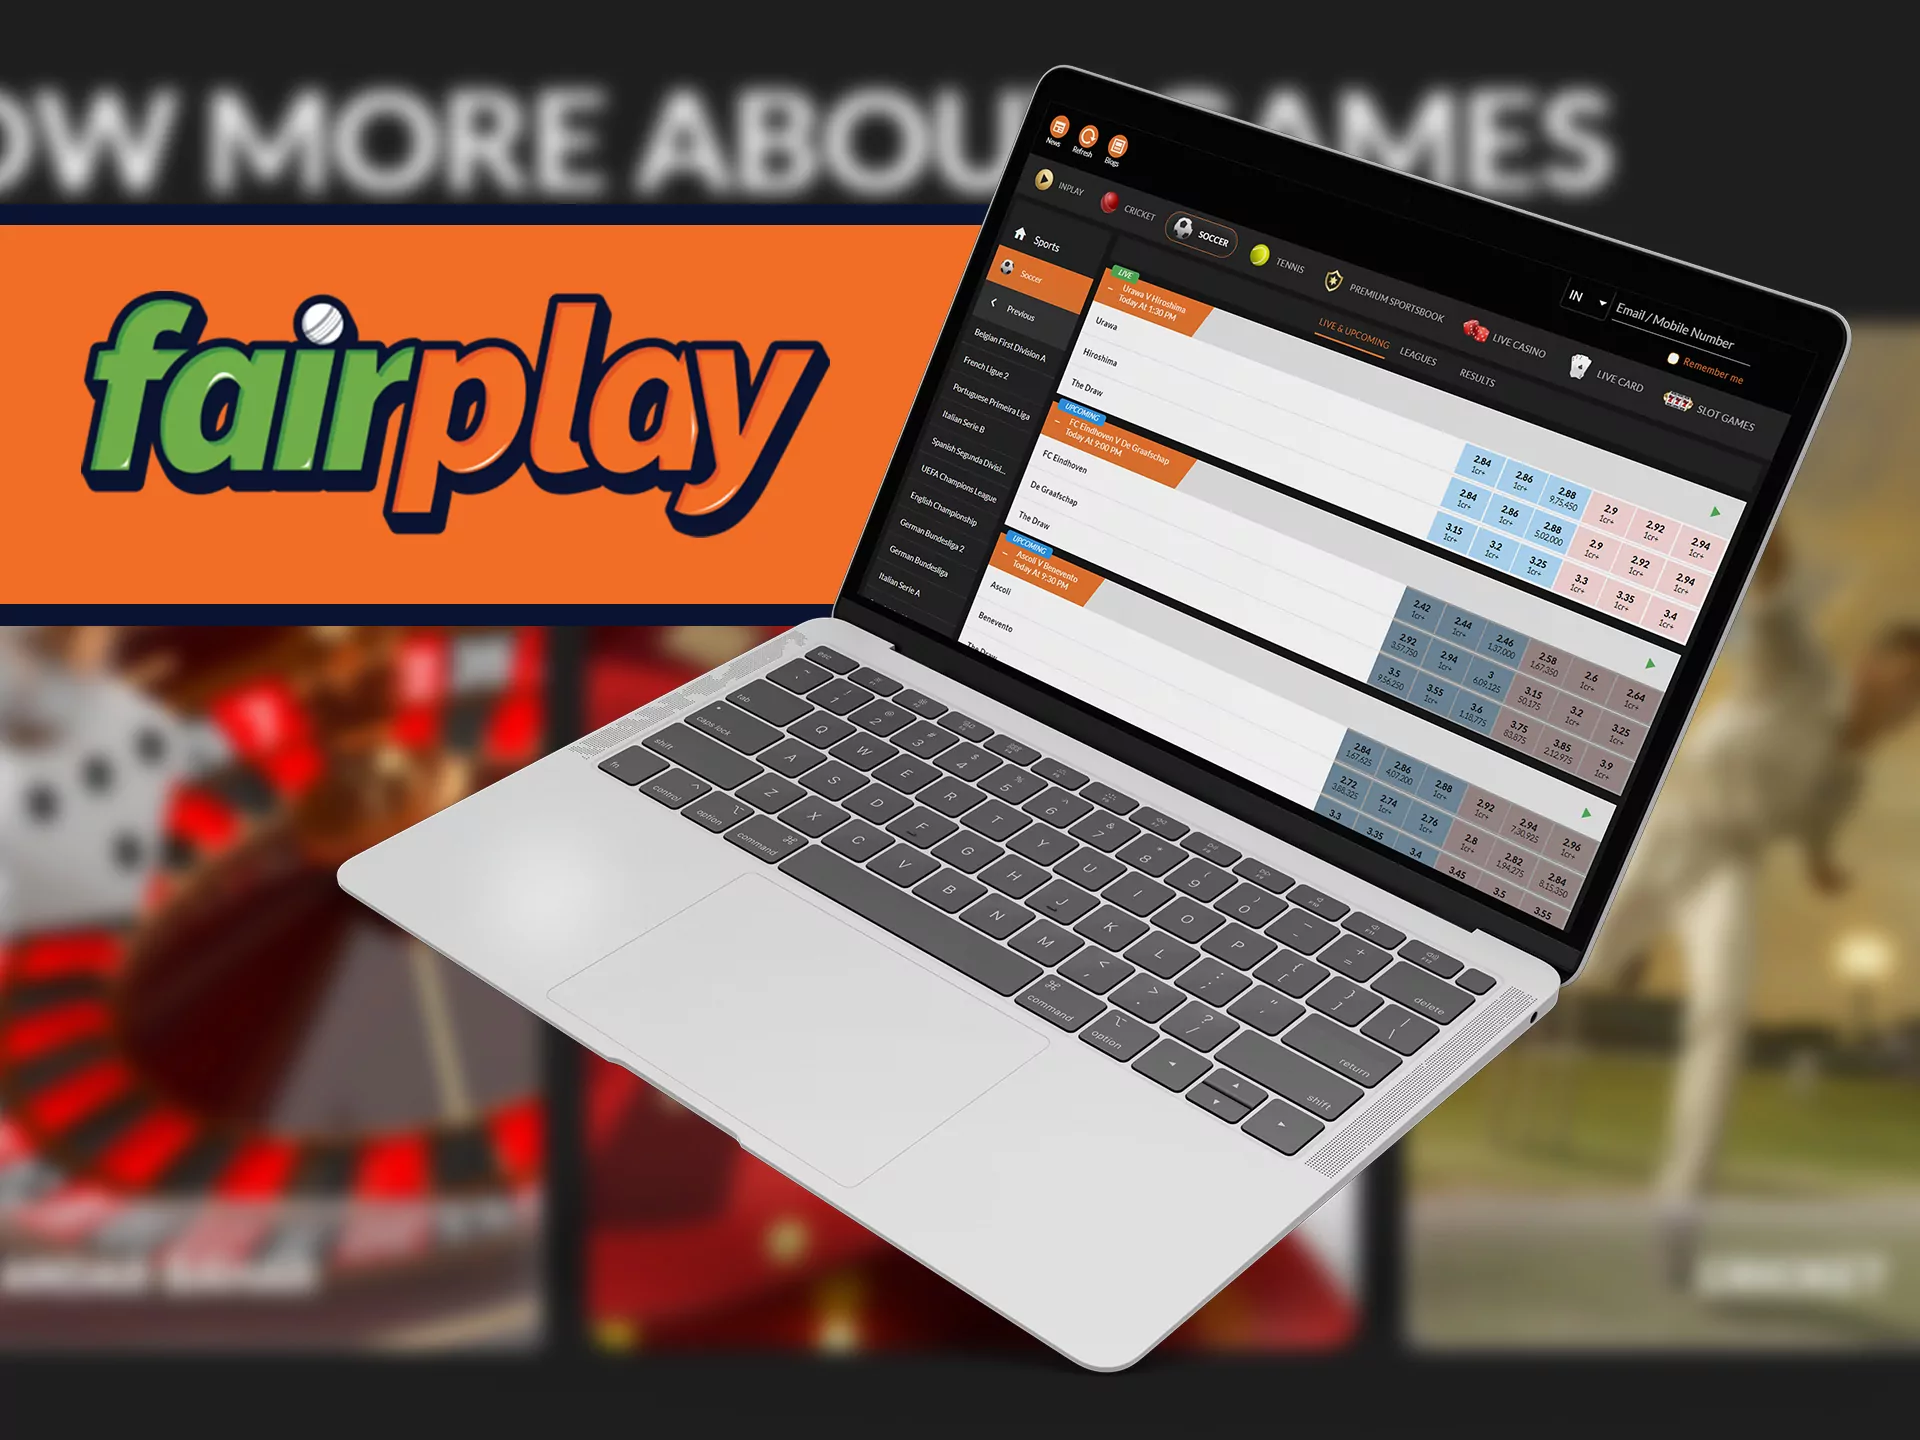 Download the Fairplay desktop version on your PC.